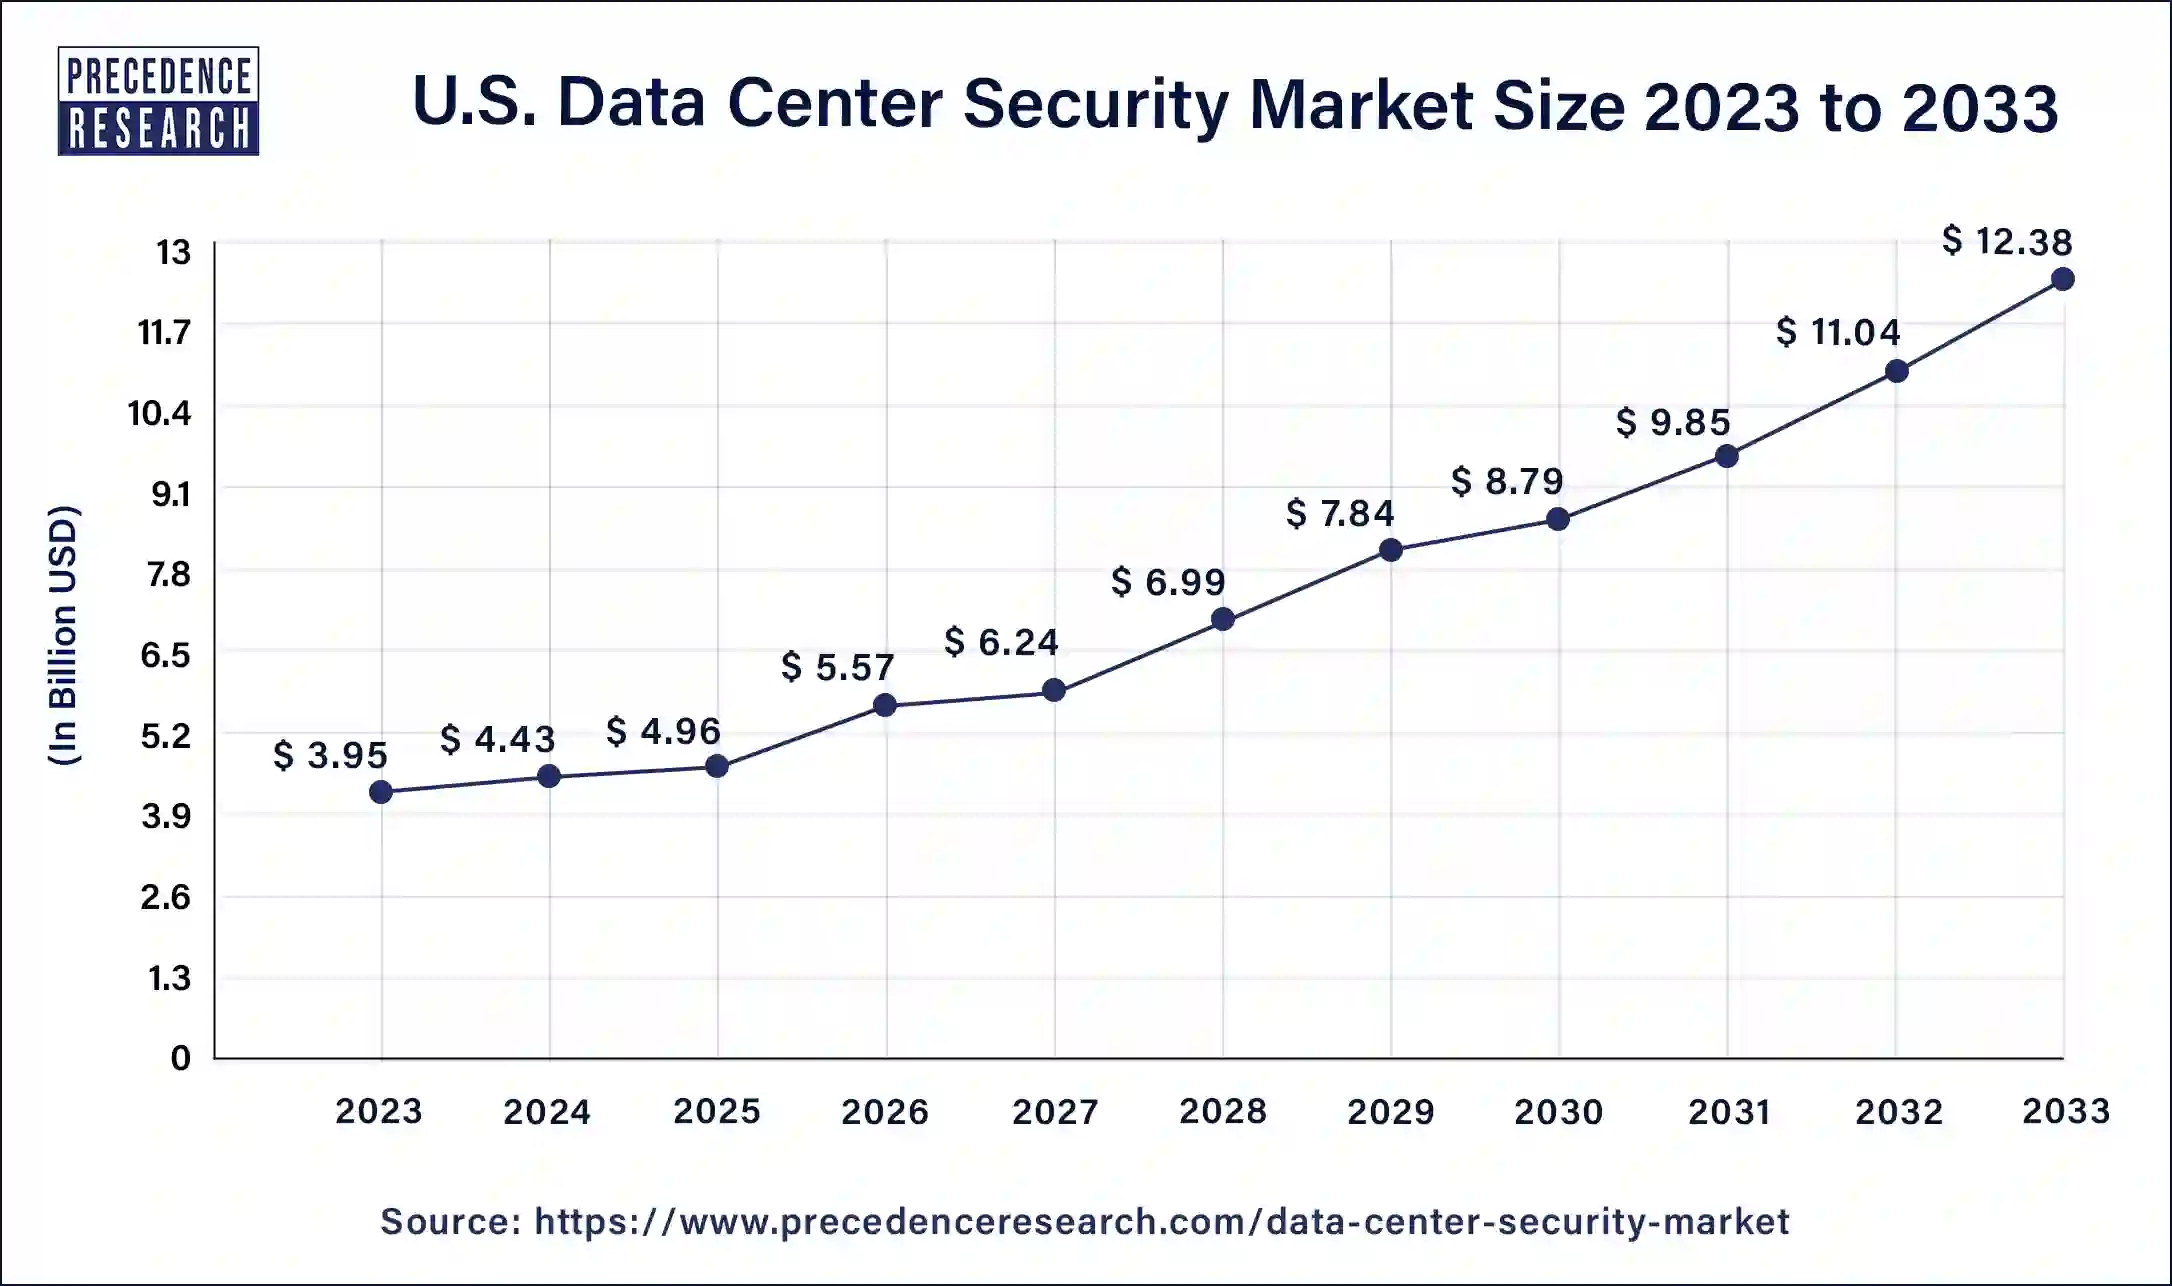 U.S. Data Center Security Market Size 2024 to 2033